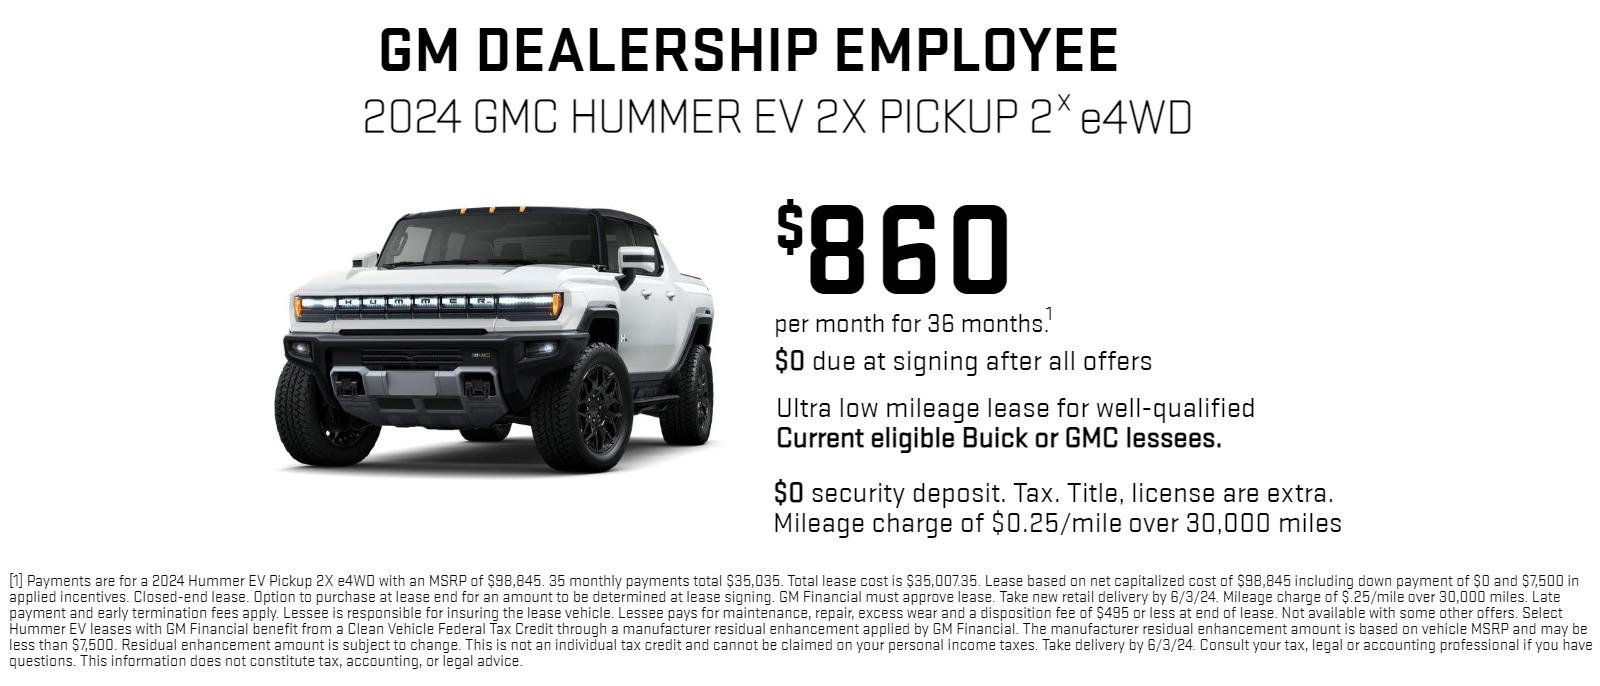 2024 Hummer EV 2X Pickup
Stock# G542759
Purchase for $99,679
Lease for $809 per month, 36 months, $2995 down
$0 first payment